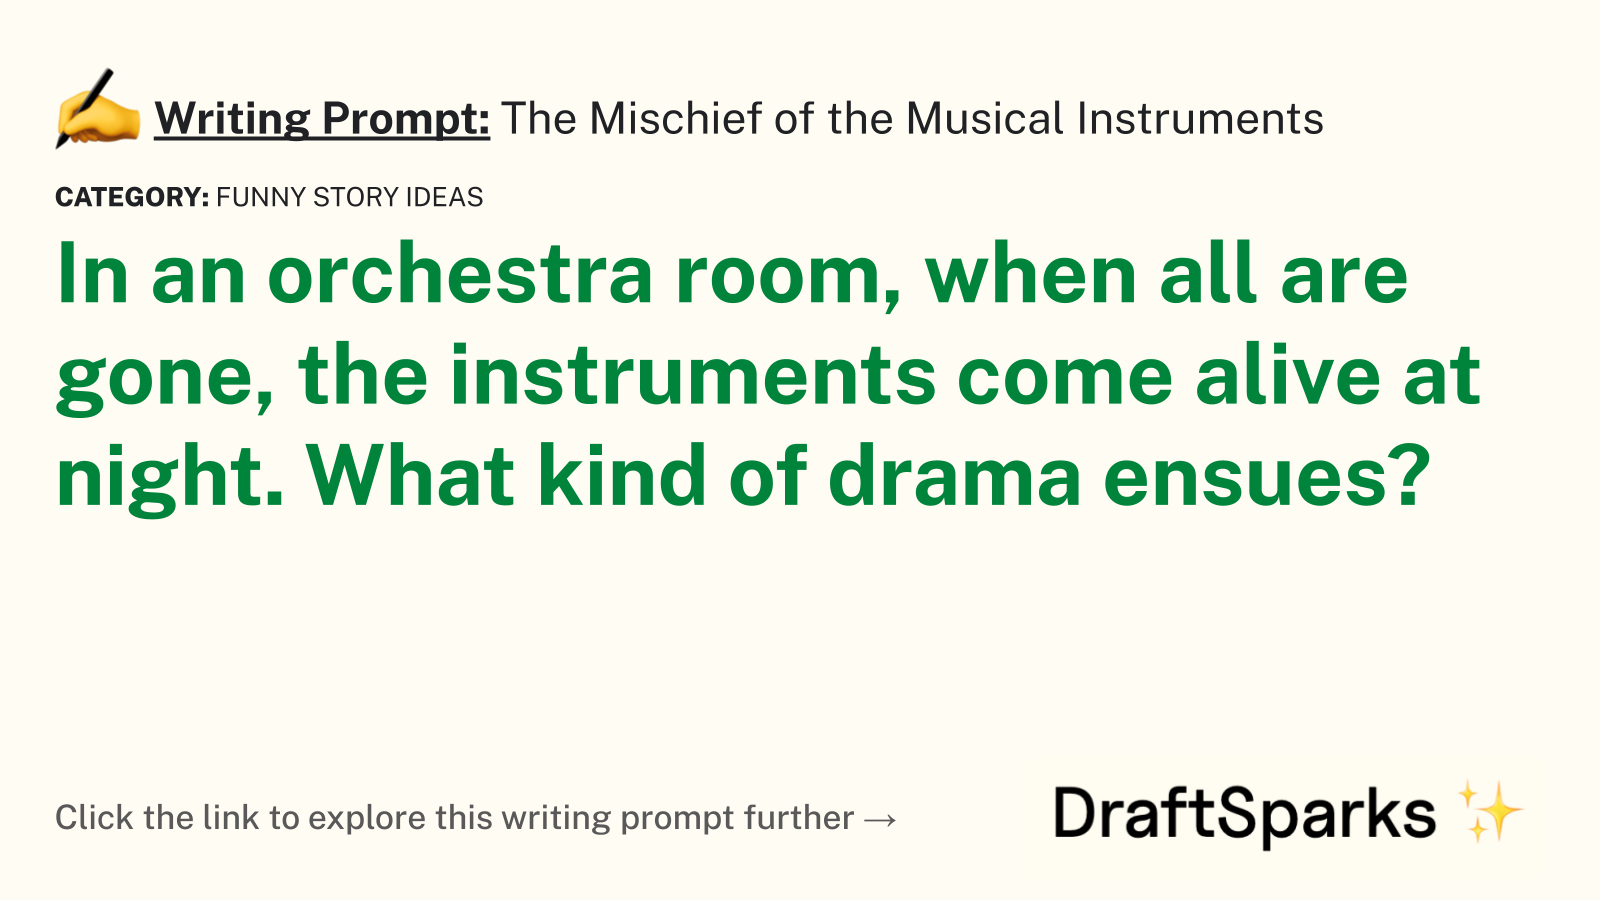 The Mischief of the Musical Instruments